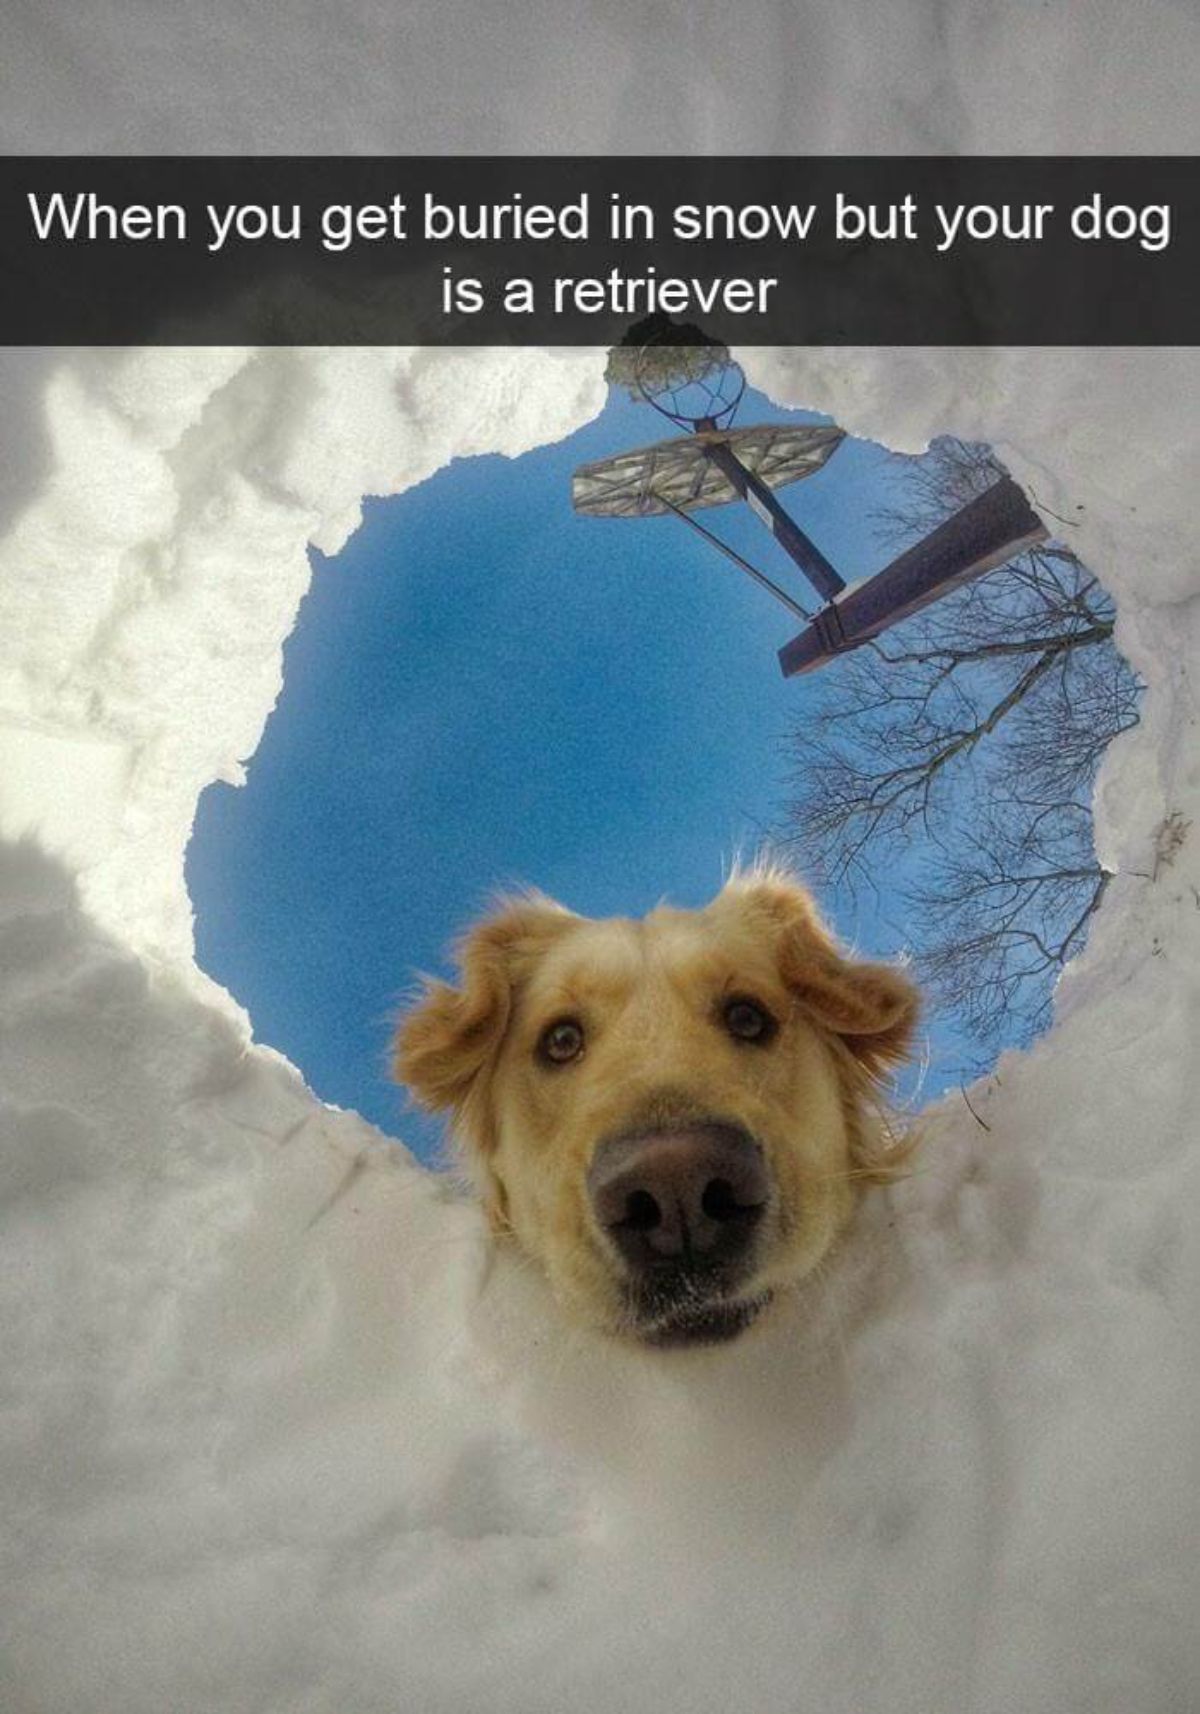 golden retriever looking down at someone through a hole in ice with a caption saying when you get buried in snow but your dog is a retriever